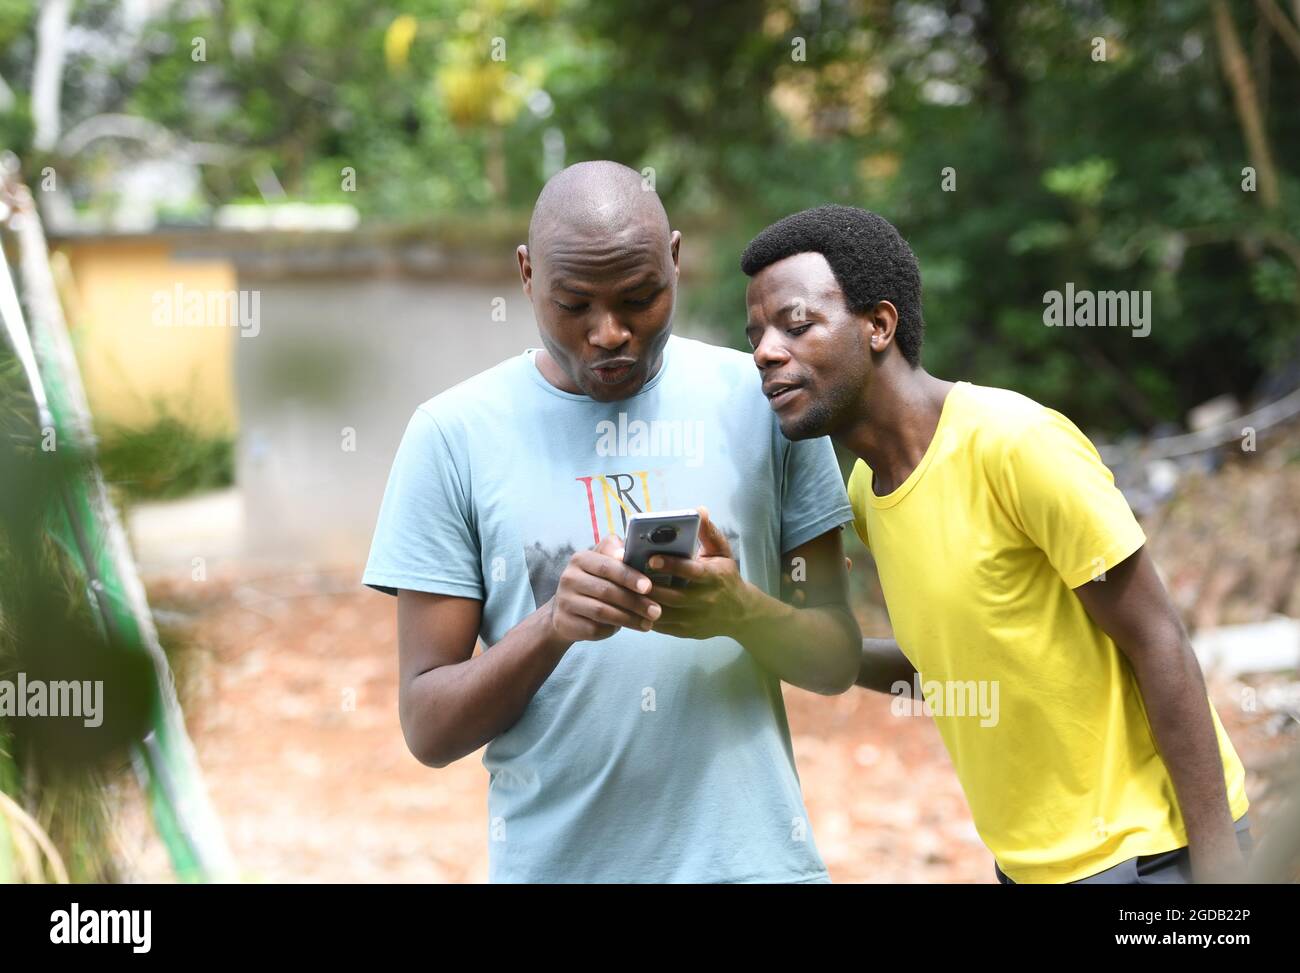 (210812) -- FUZHOU, Aug. 12, 2021 (Xinhua) -- Rwandan student Obed Niyimbabazi (R) and Kenyan student Eyalira Jacob Okal watch video about Juncao grass on a smart phone in Fuzhou, southeast China's Fujian Province, Aug. 12, 2021.  China has shared the agricultural technology with over 100 countries. Its use can help increase local income through low-cost mushroom cultivation and contain desertification.   Fujian Agriculture and Forestry University has trained many experts of Juncao technology for African countries since it established the National Engineering Research Center of Juncao. (Xinhua Stock Photo